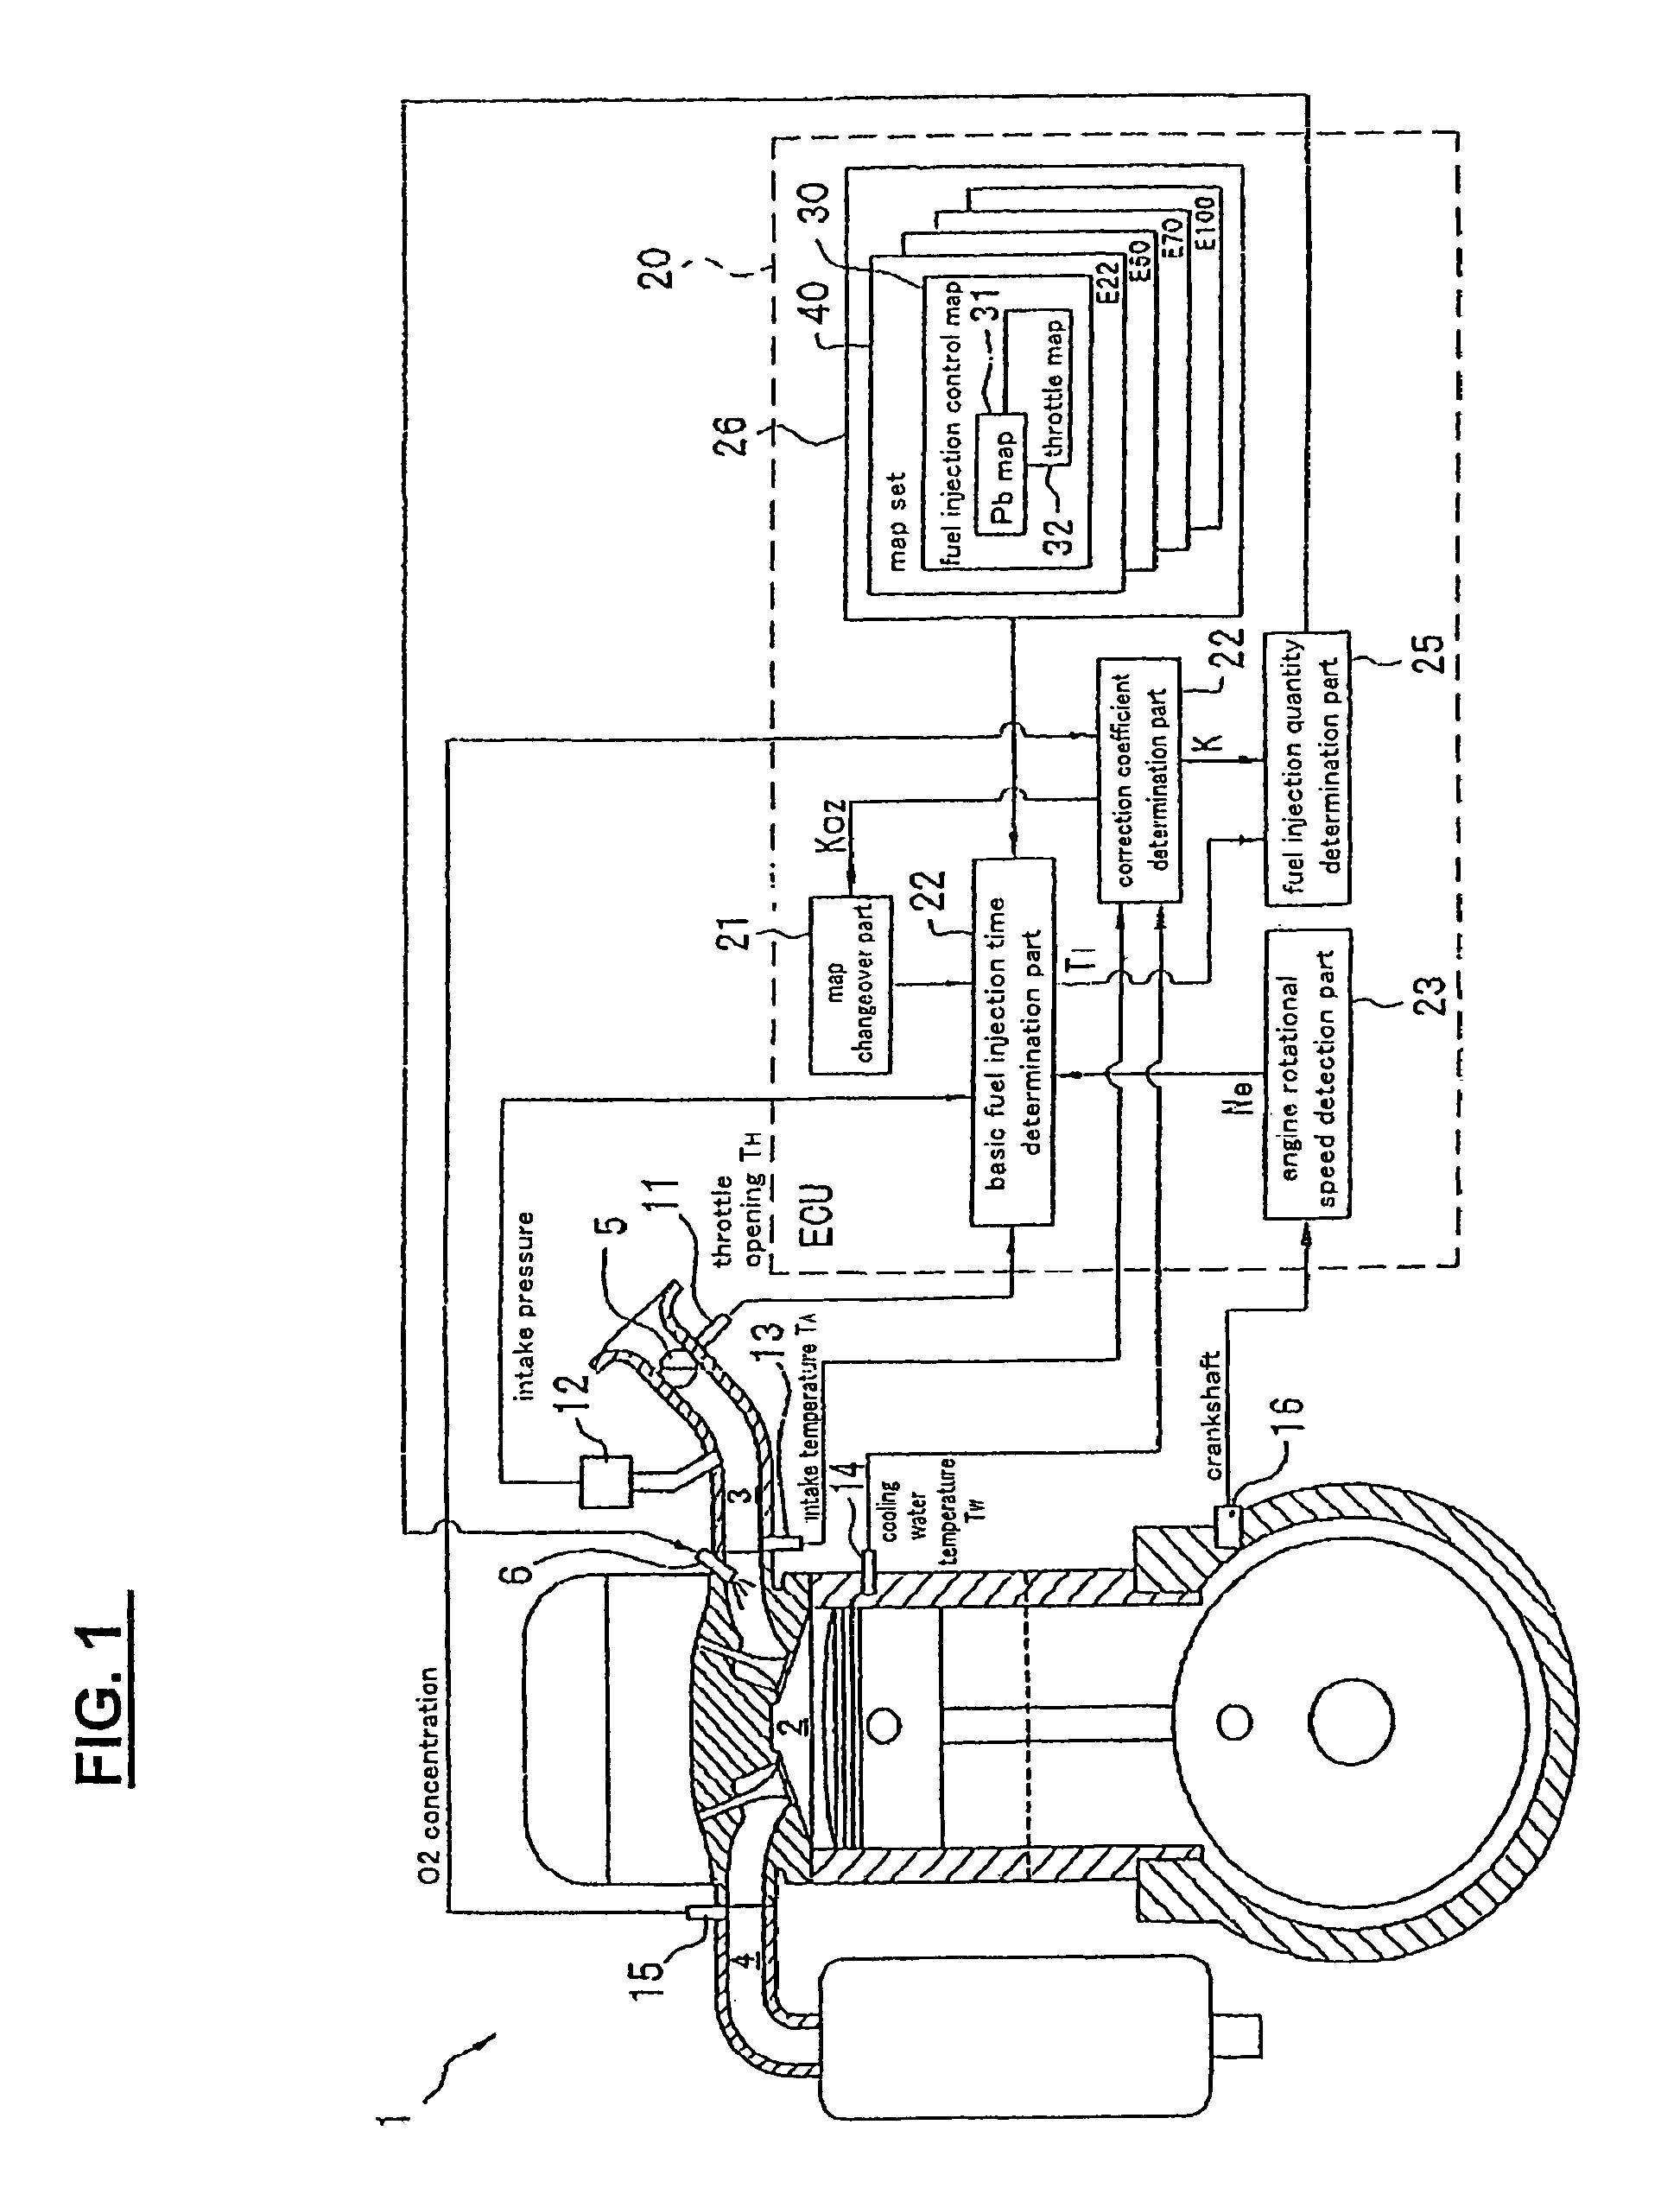 Fuel injection control device for a variable-fuel engine and engine incorporating same